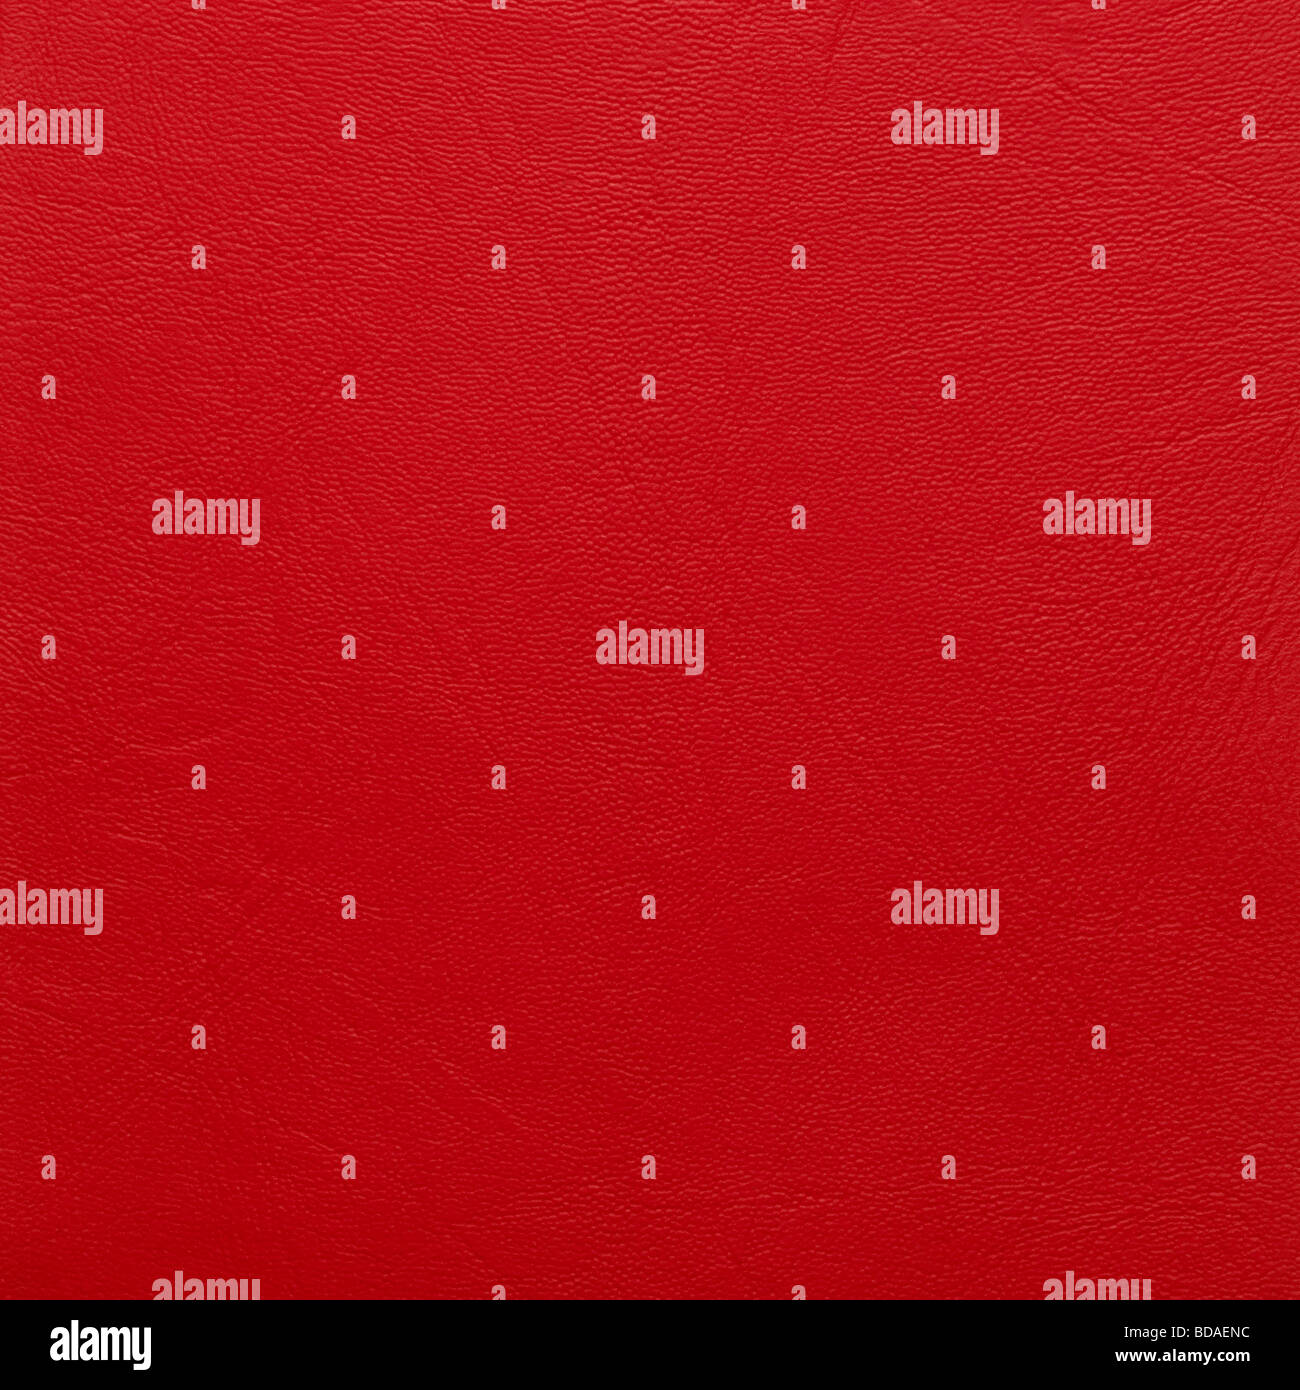 RED LEATHER BACKGROUND Stock Photo